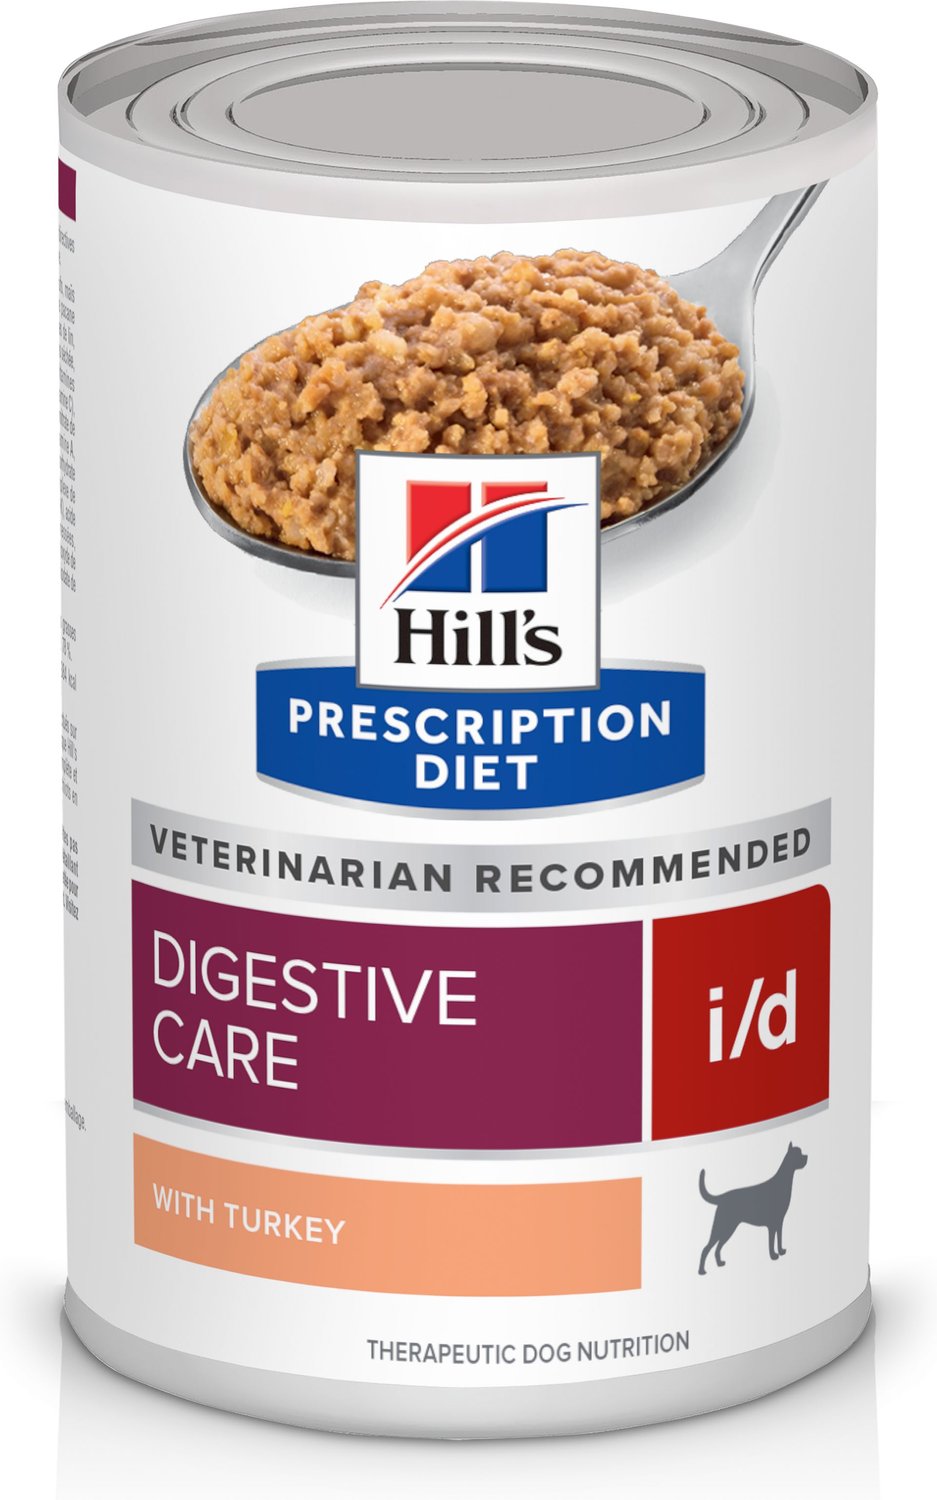 Hill's Prescription Diet i/d Digestive Care with Turkey Canned Dog Food